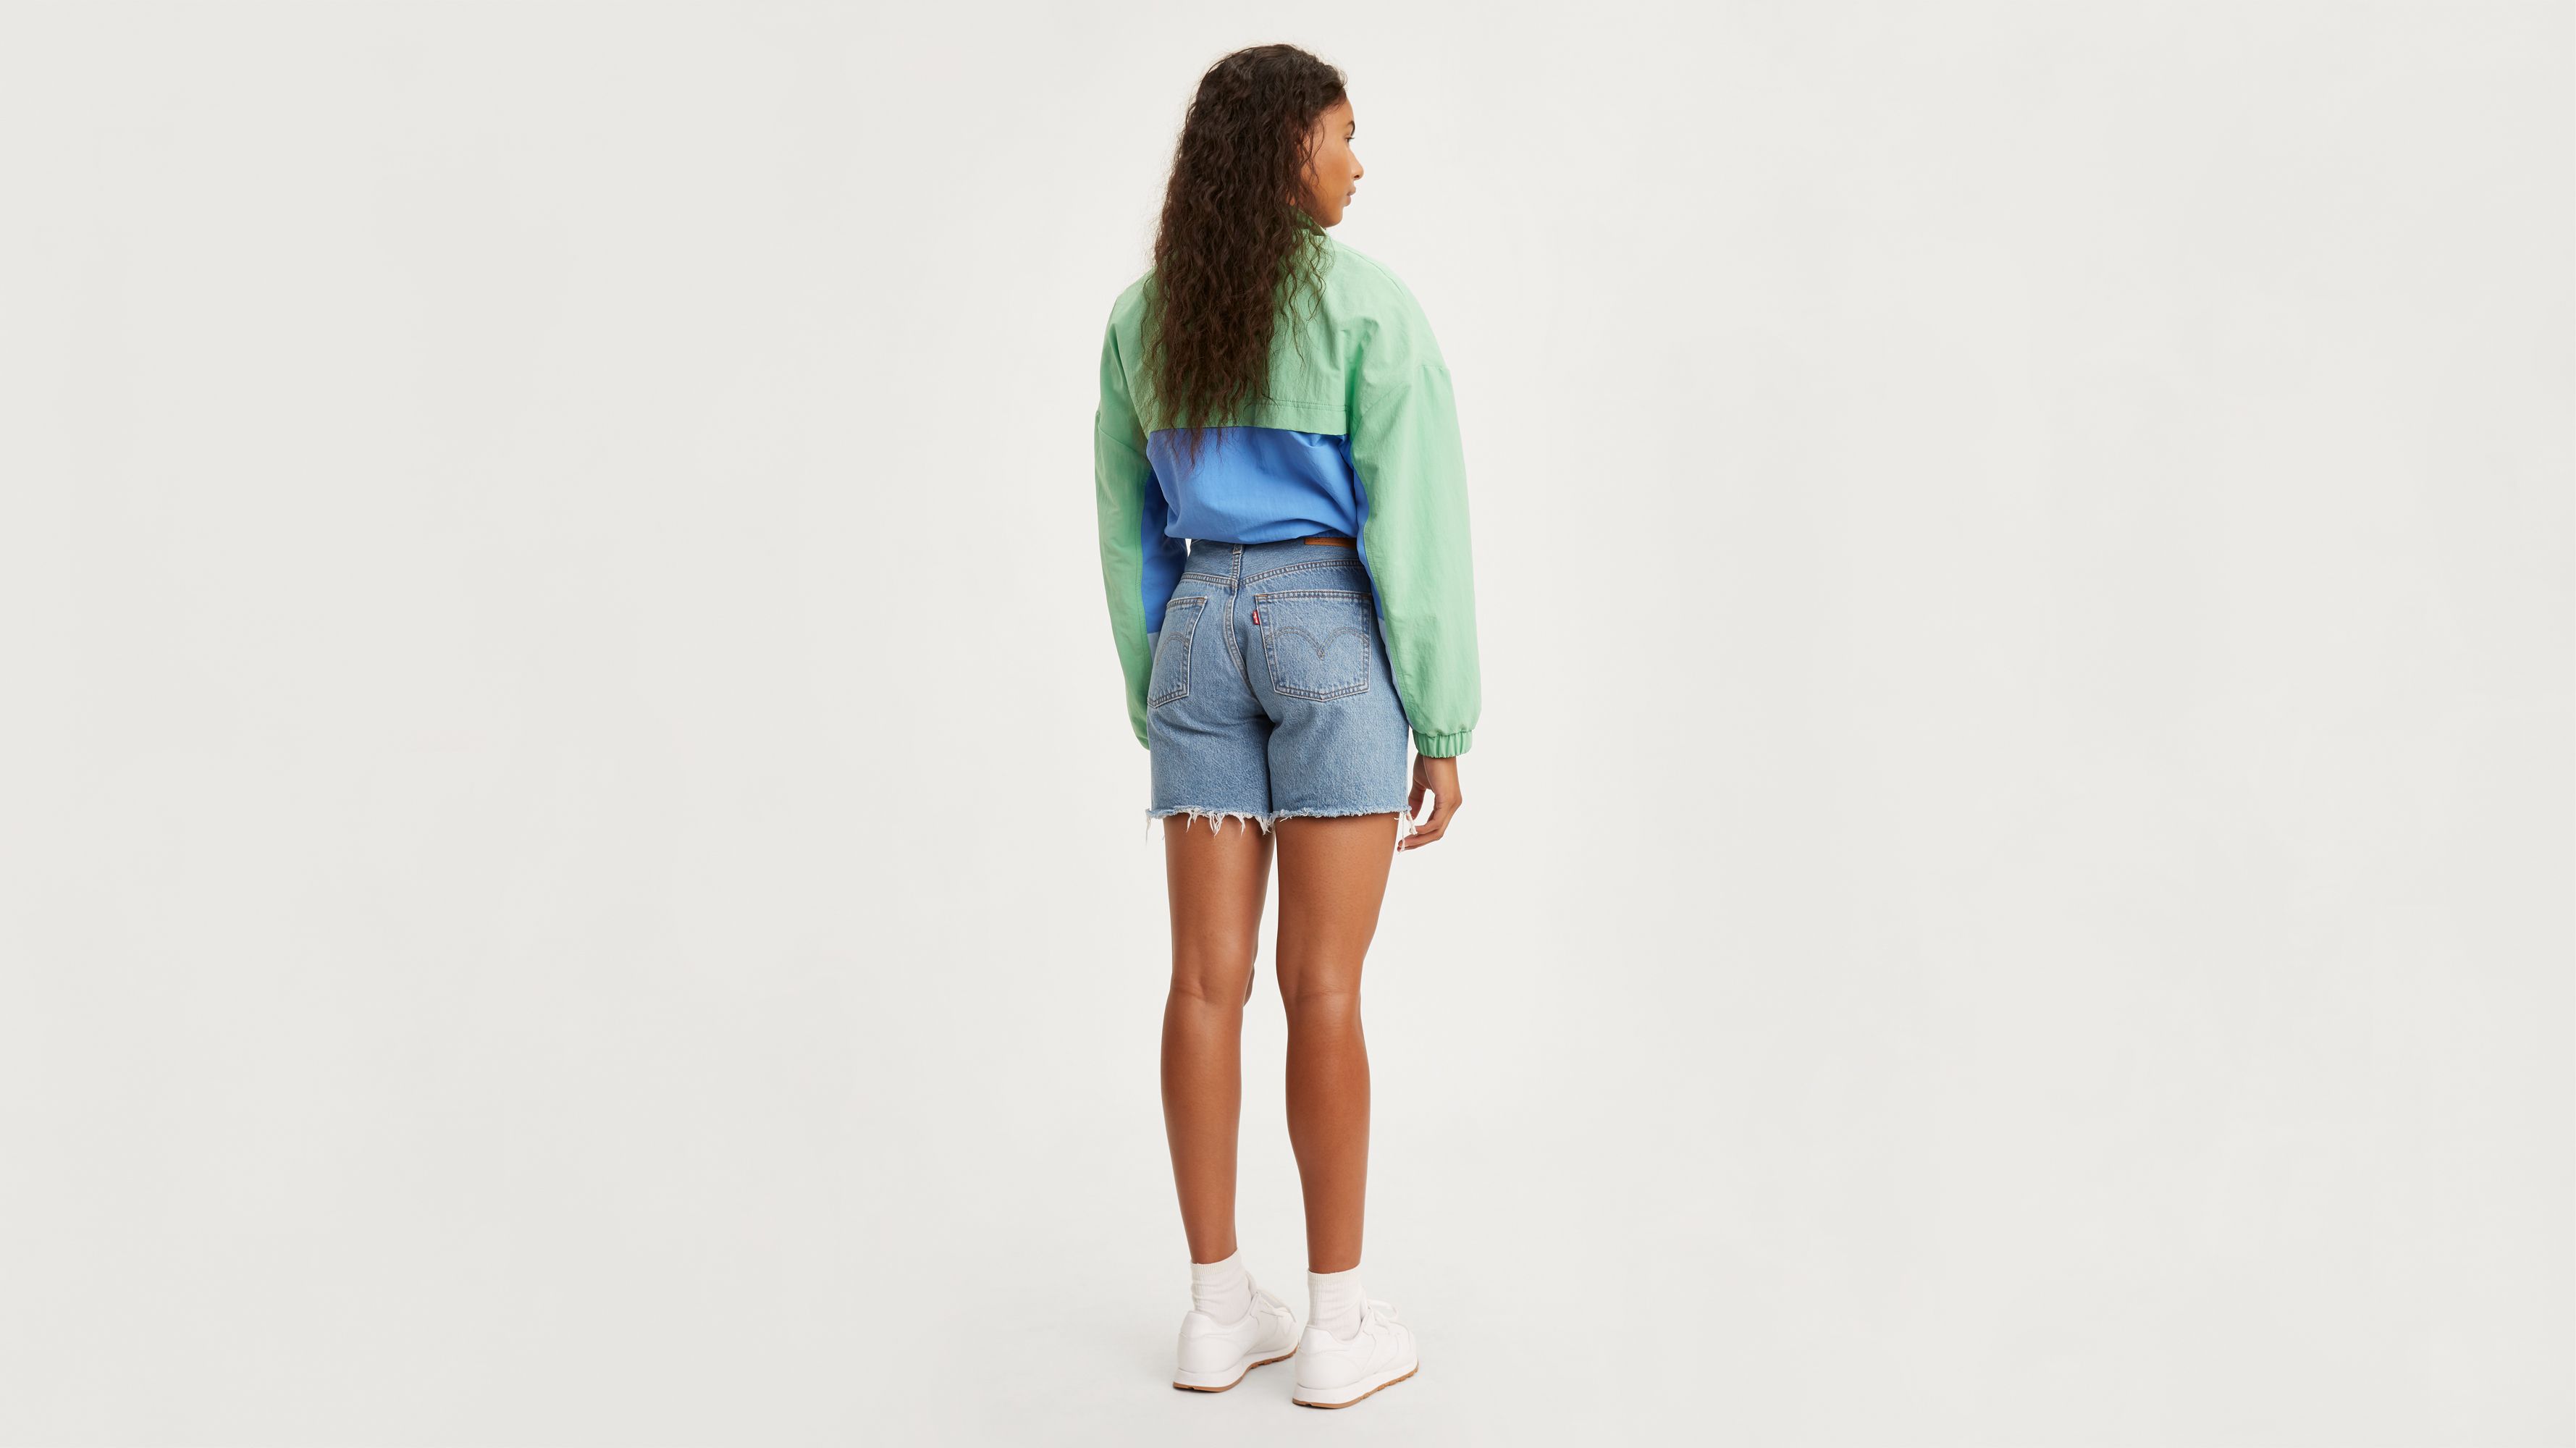 levis ripped shorts women's